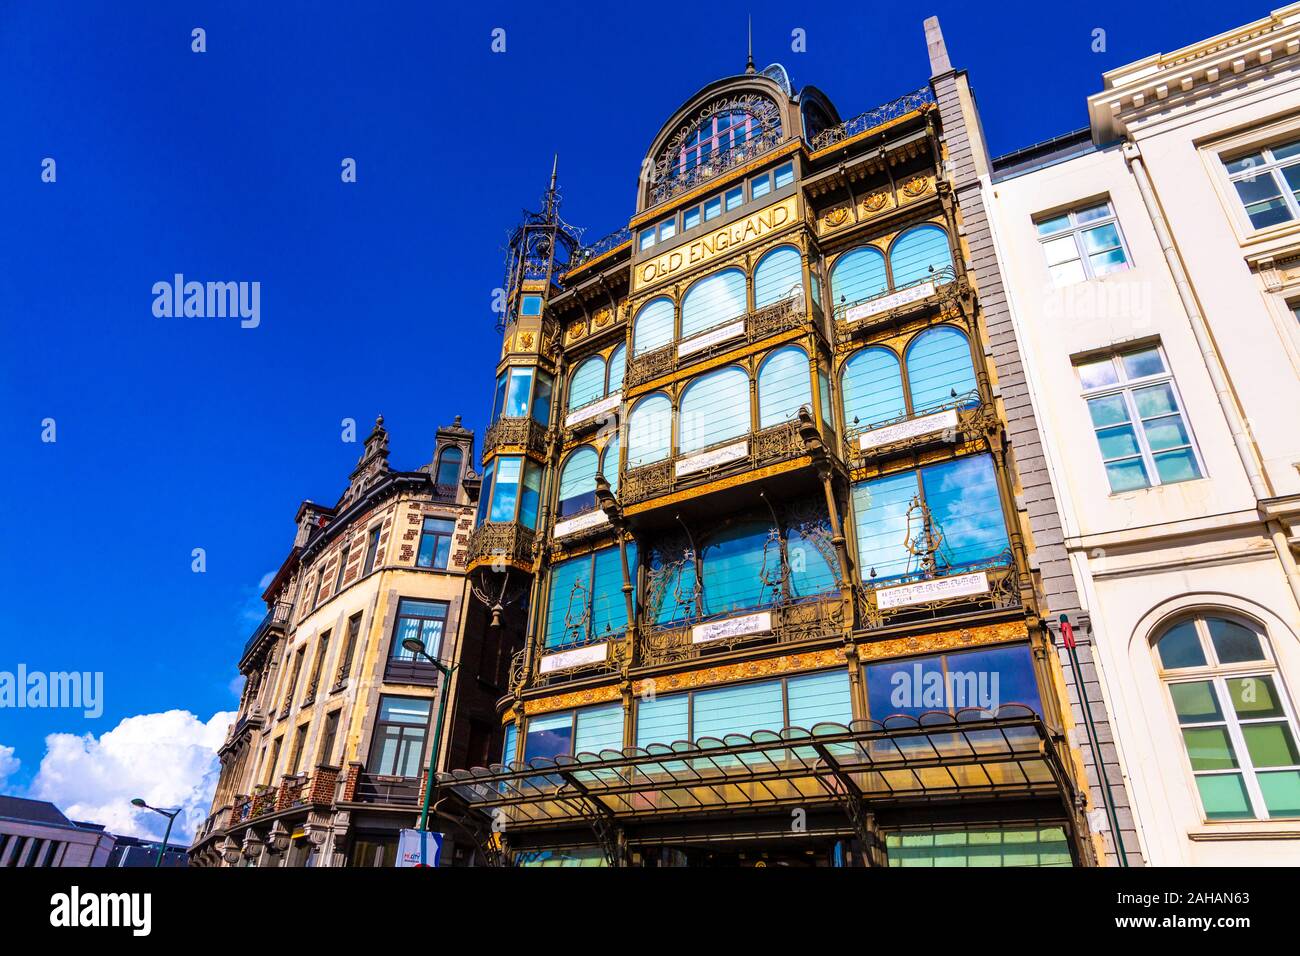 Museum of Musical Instruments housed in a former department store art nouveau style building Old England, Brussels, Belgium Stock Photo